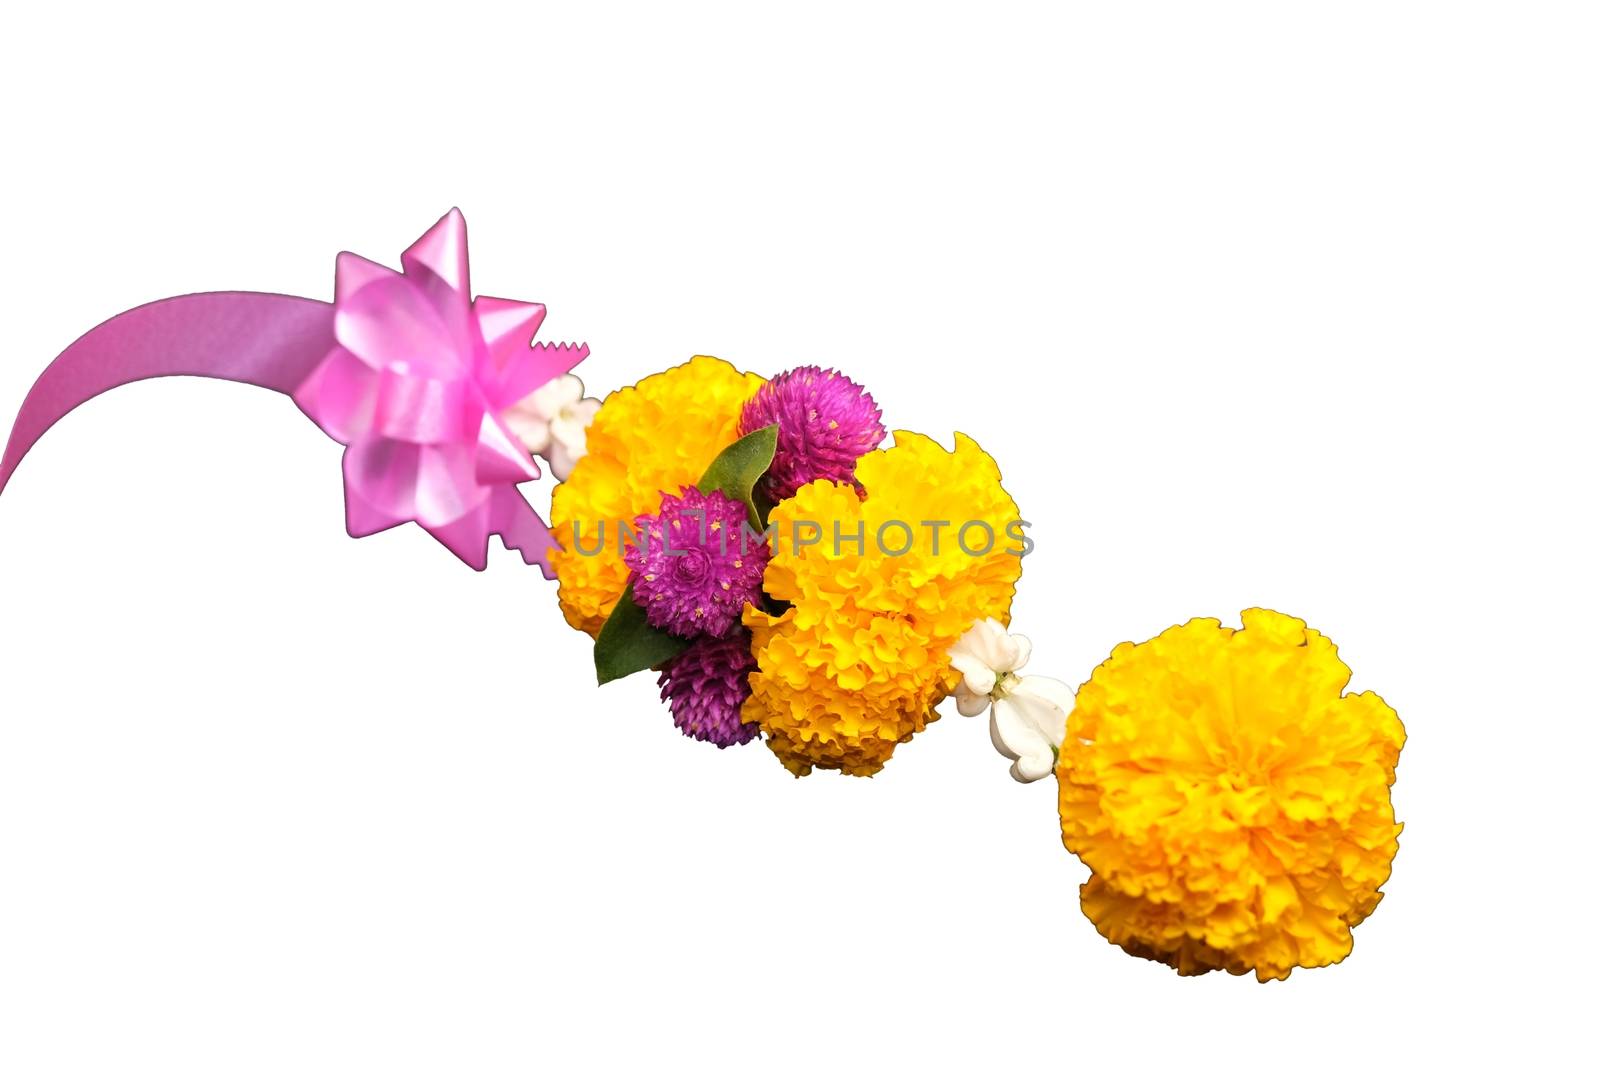 Garlands Of Flowers on the white background with space for put text by peerapixs